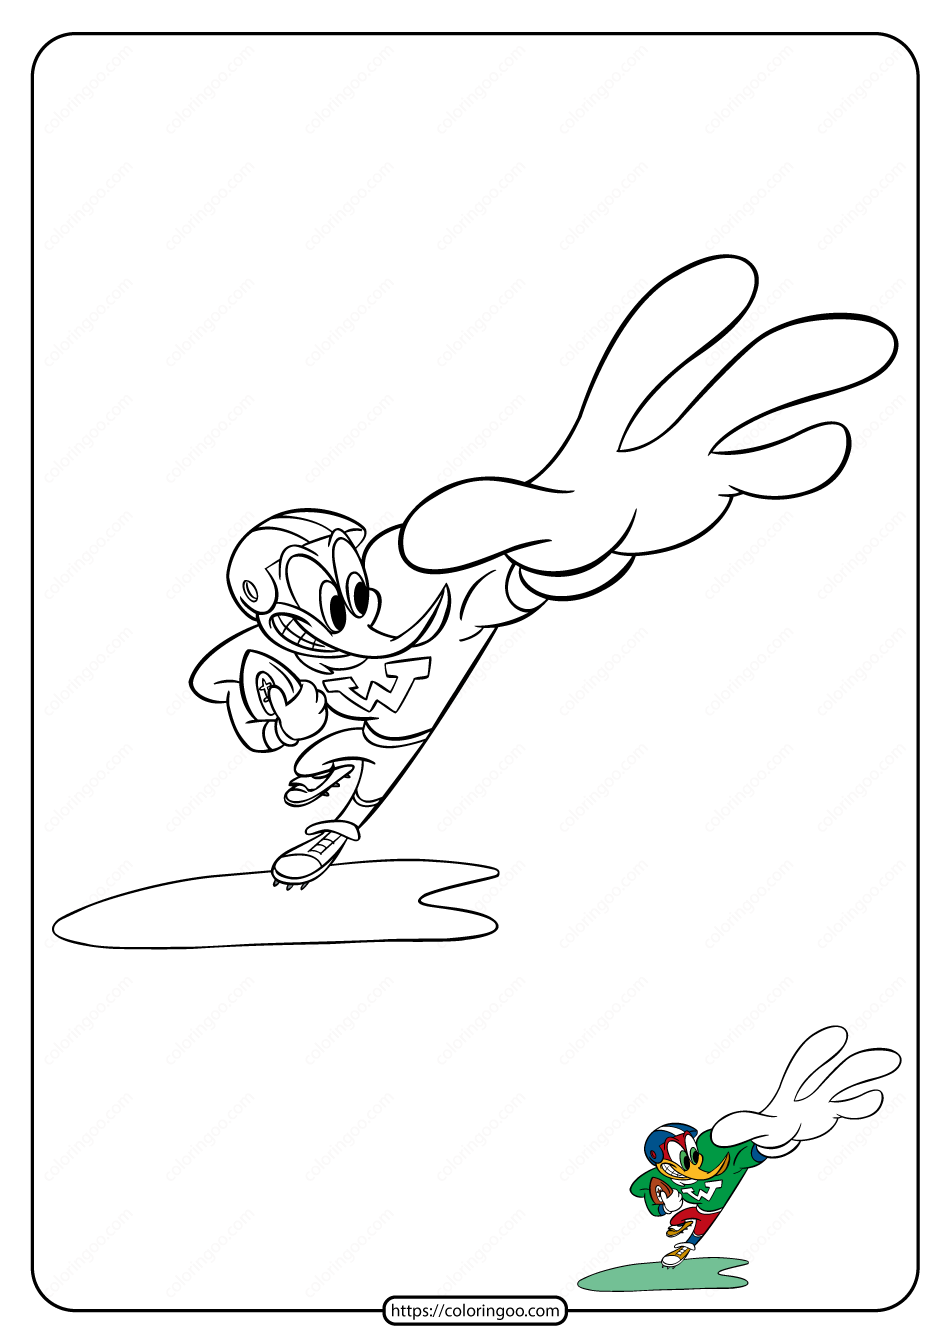 Woody Woodpecker Plays American Football Coloring Page